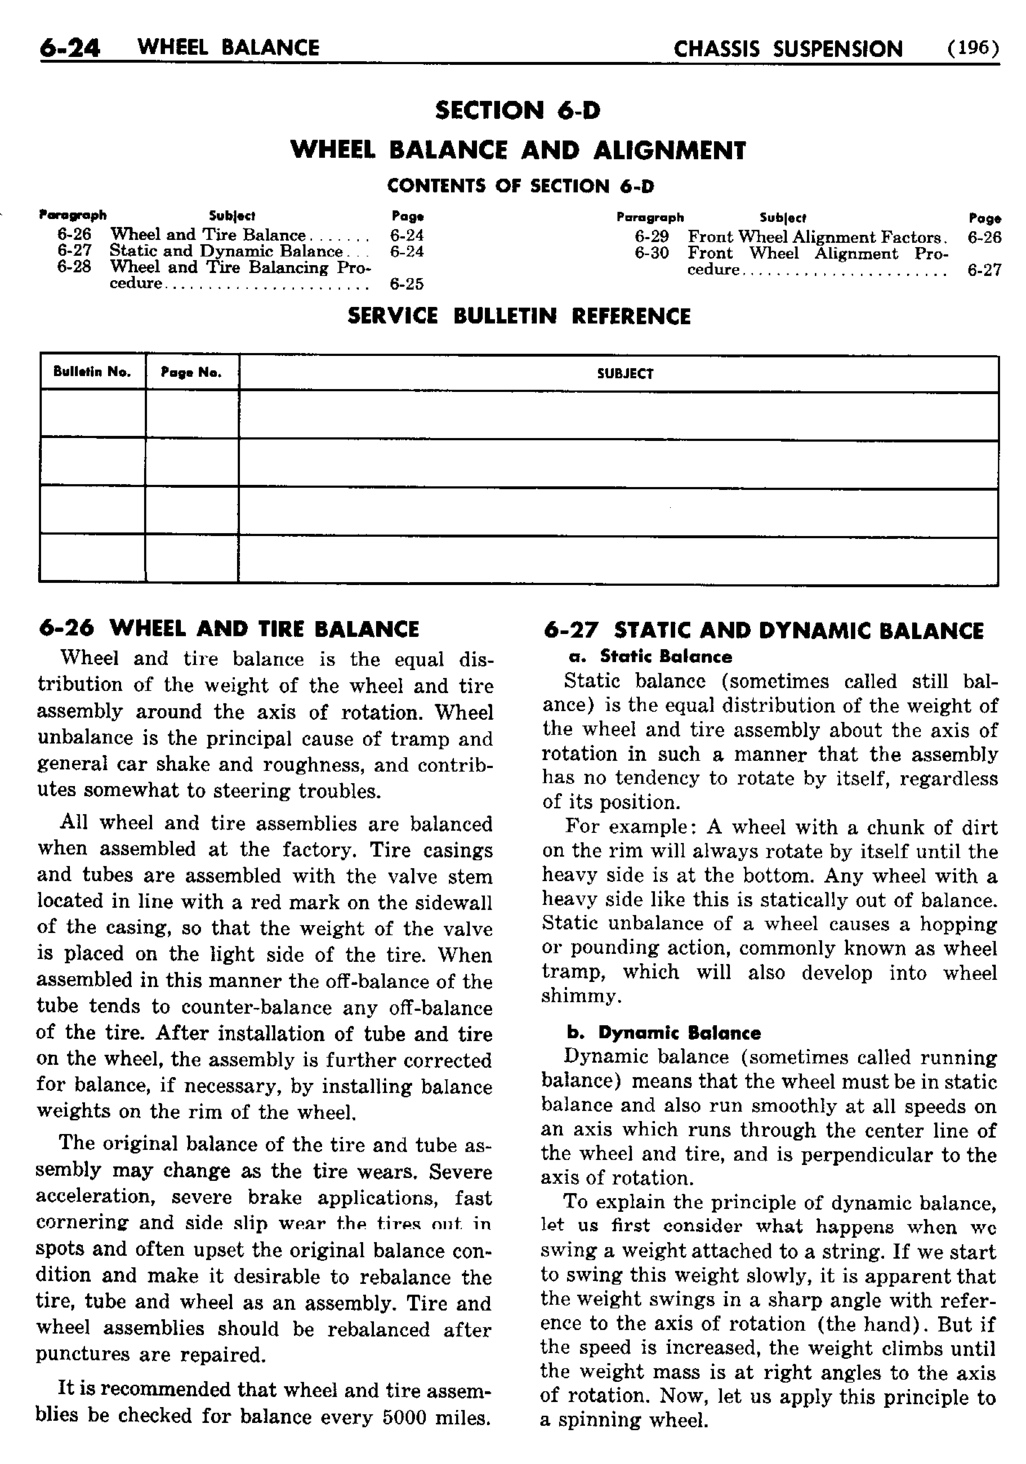 n_07 1950 Buick Shop Manual - Chassis Suspension-024-024.jpg